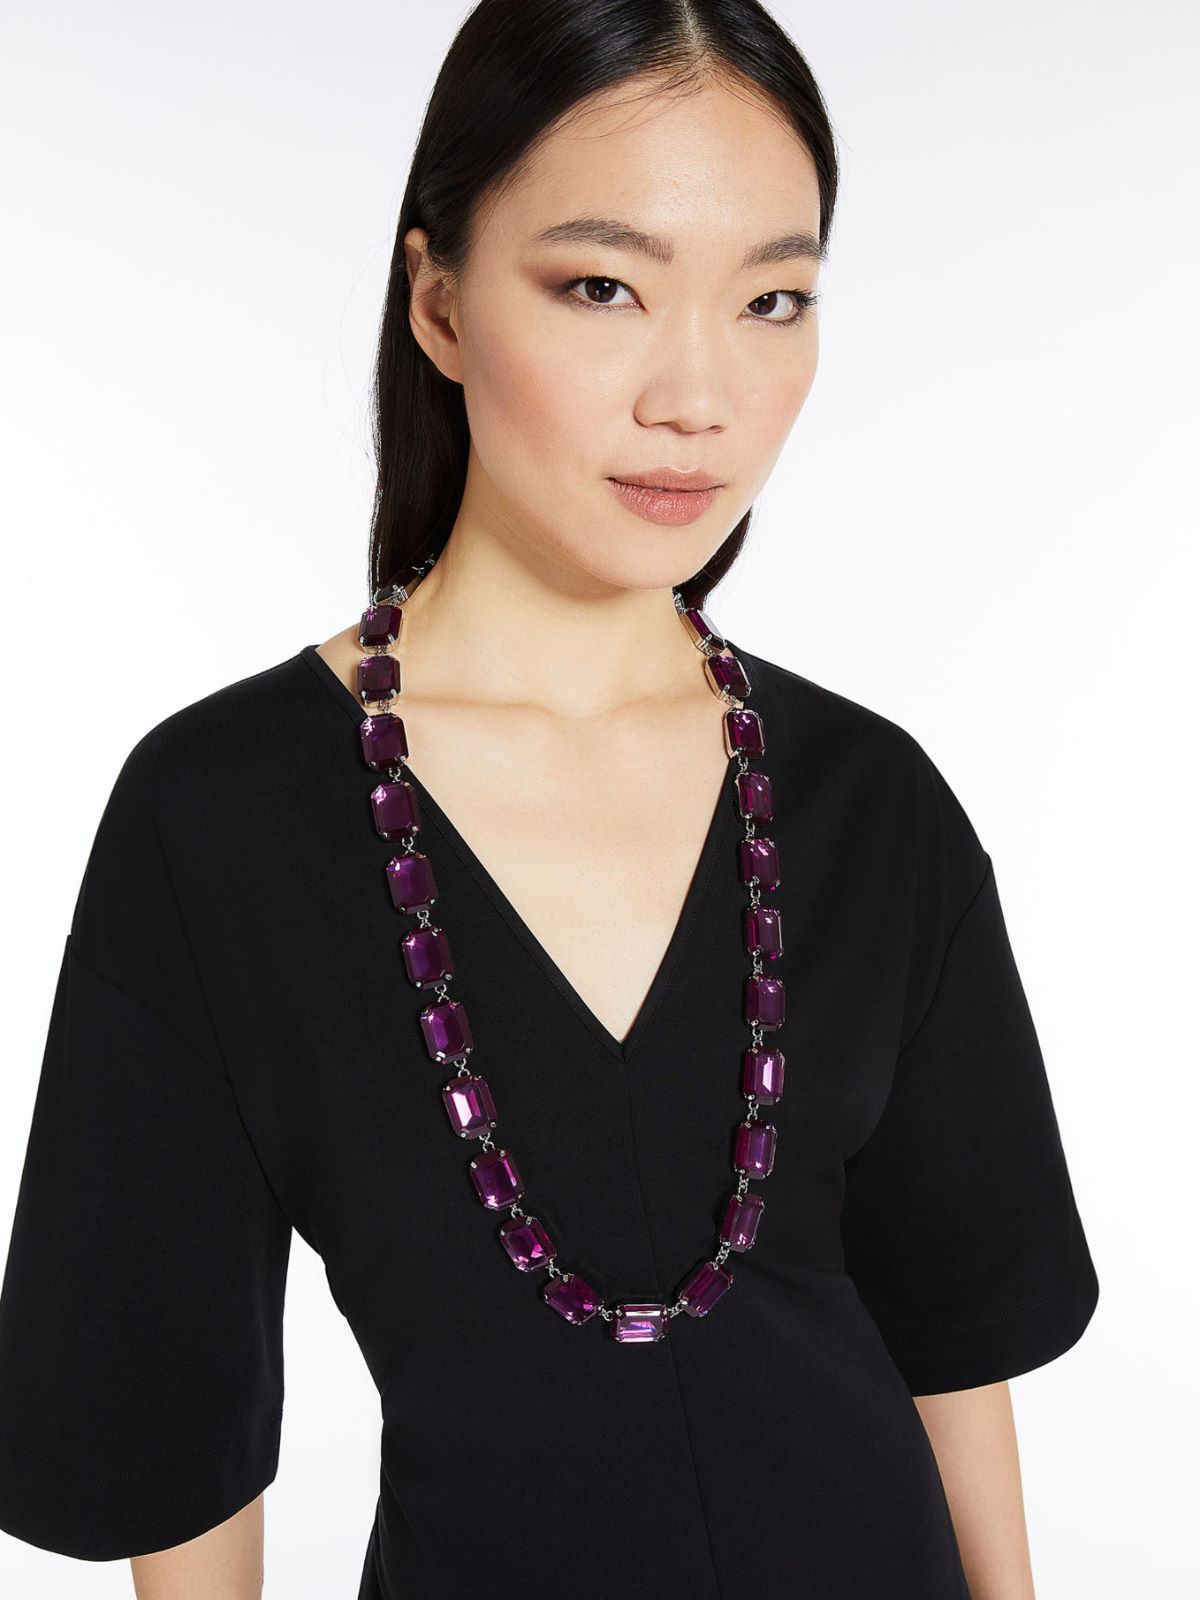 Long necklace with bezels - FUCHSIA - Weekend Max Mara - 5